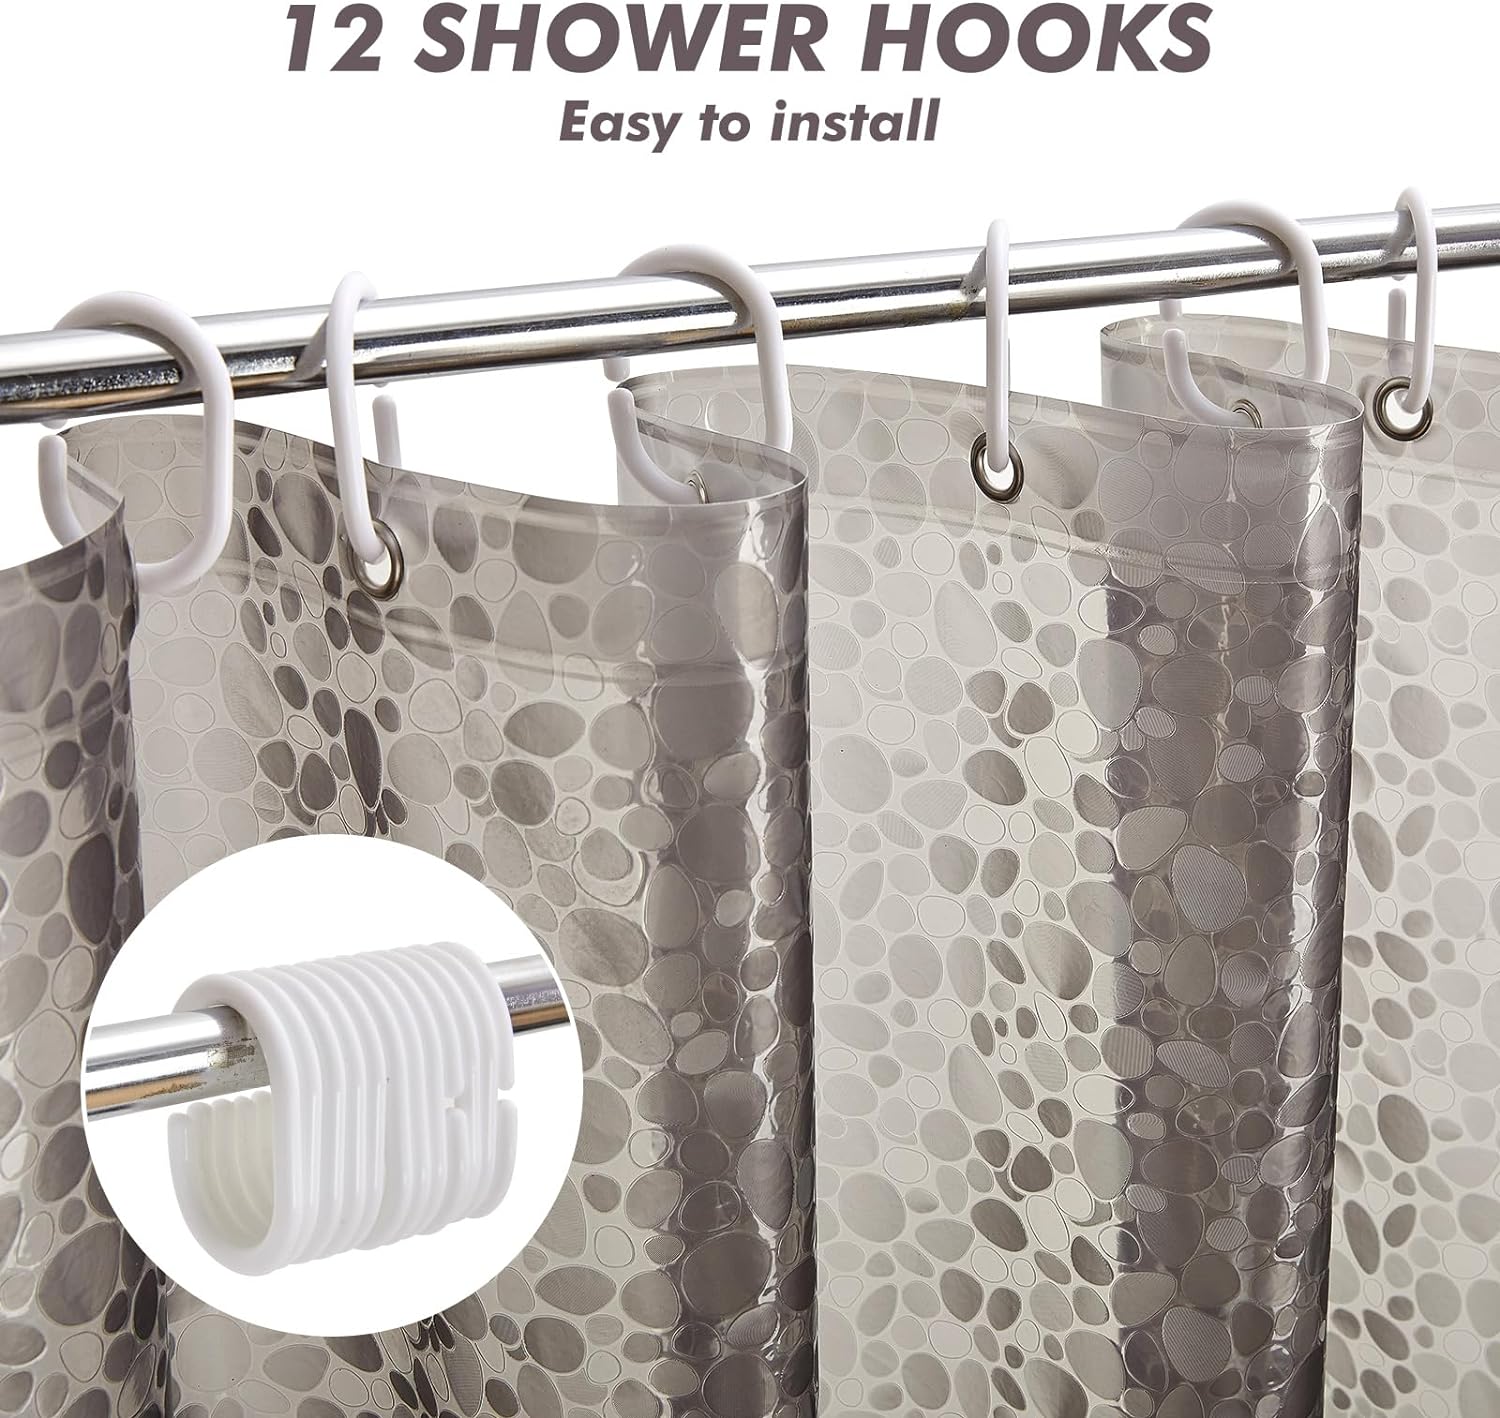 Waterproof Shower Curtain Liner 8G EVA Thick with Heavy Duty 3 Bottom Magnets, Shower Liner for Shower Stall, Bathtubs, 3D Pebble Pattern, 72 x 72,12 Hooks